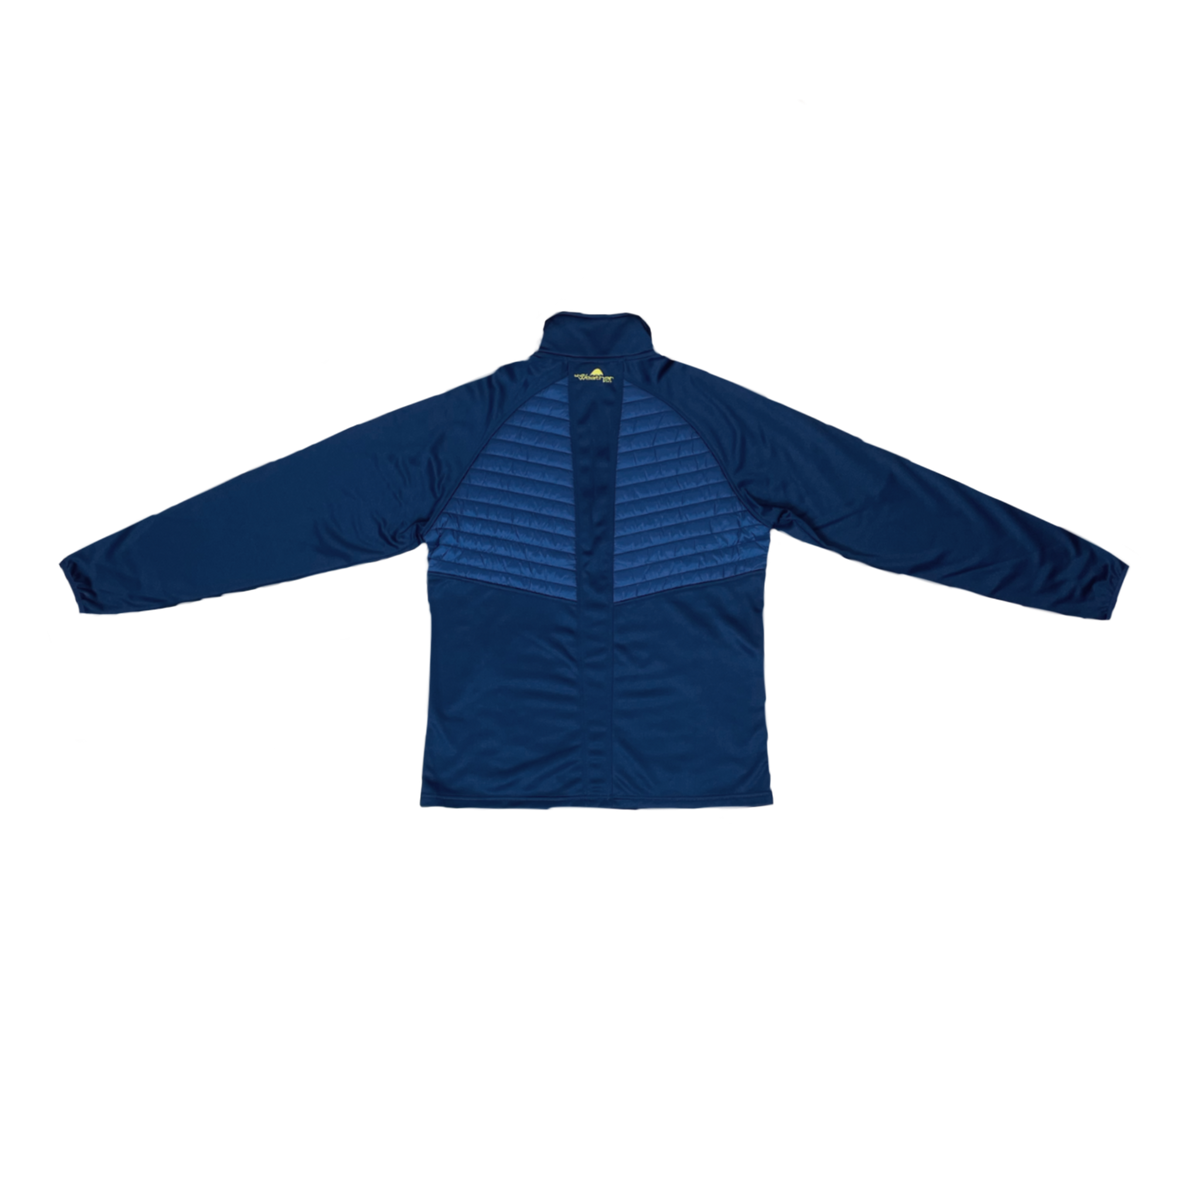 MEN'S FULL ZIP QUILTED JACKET – The Weather Apparel Company